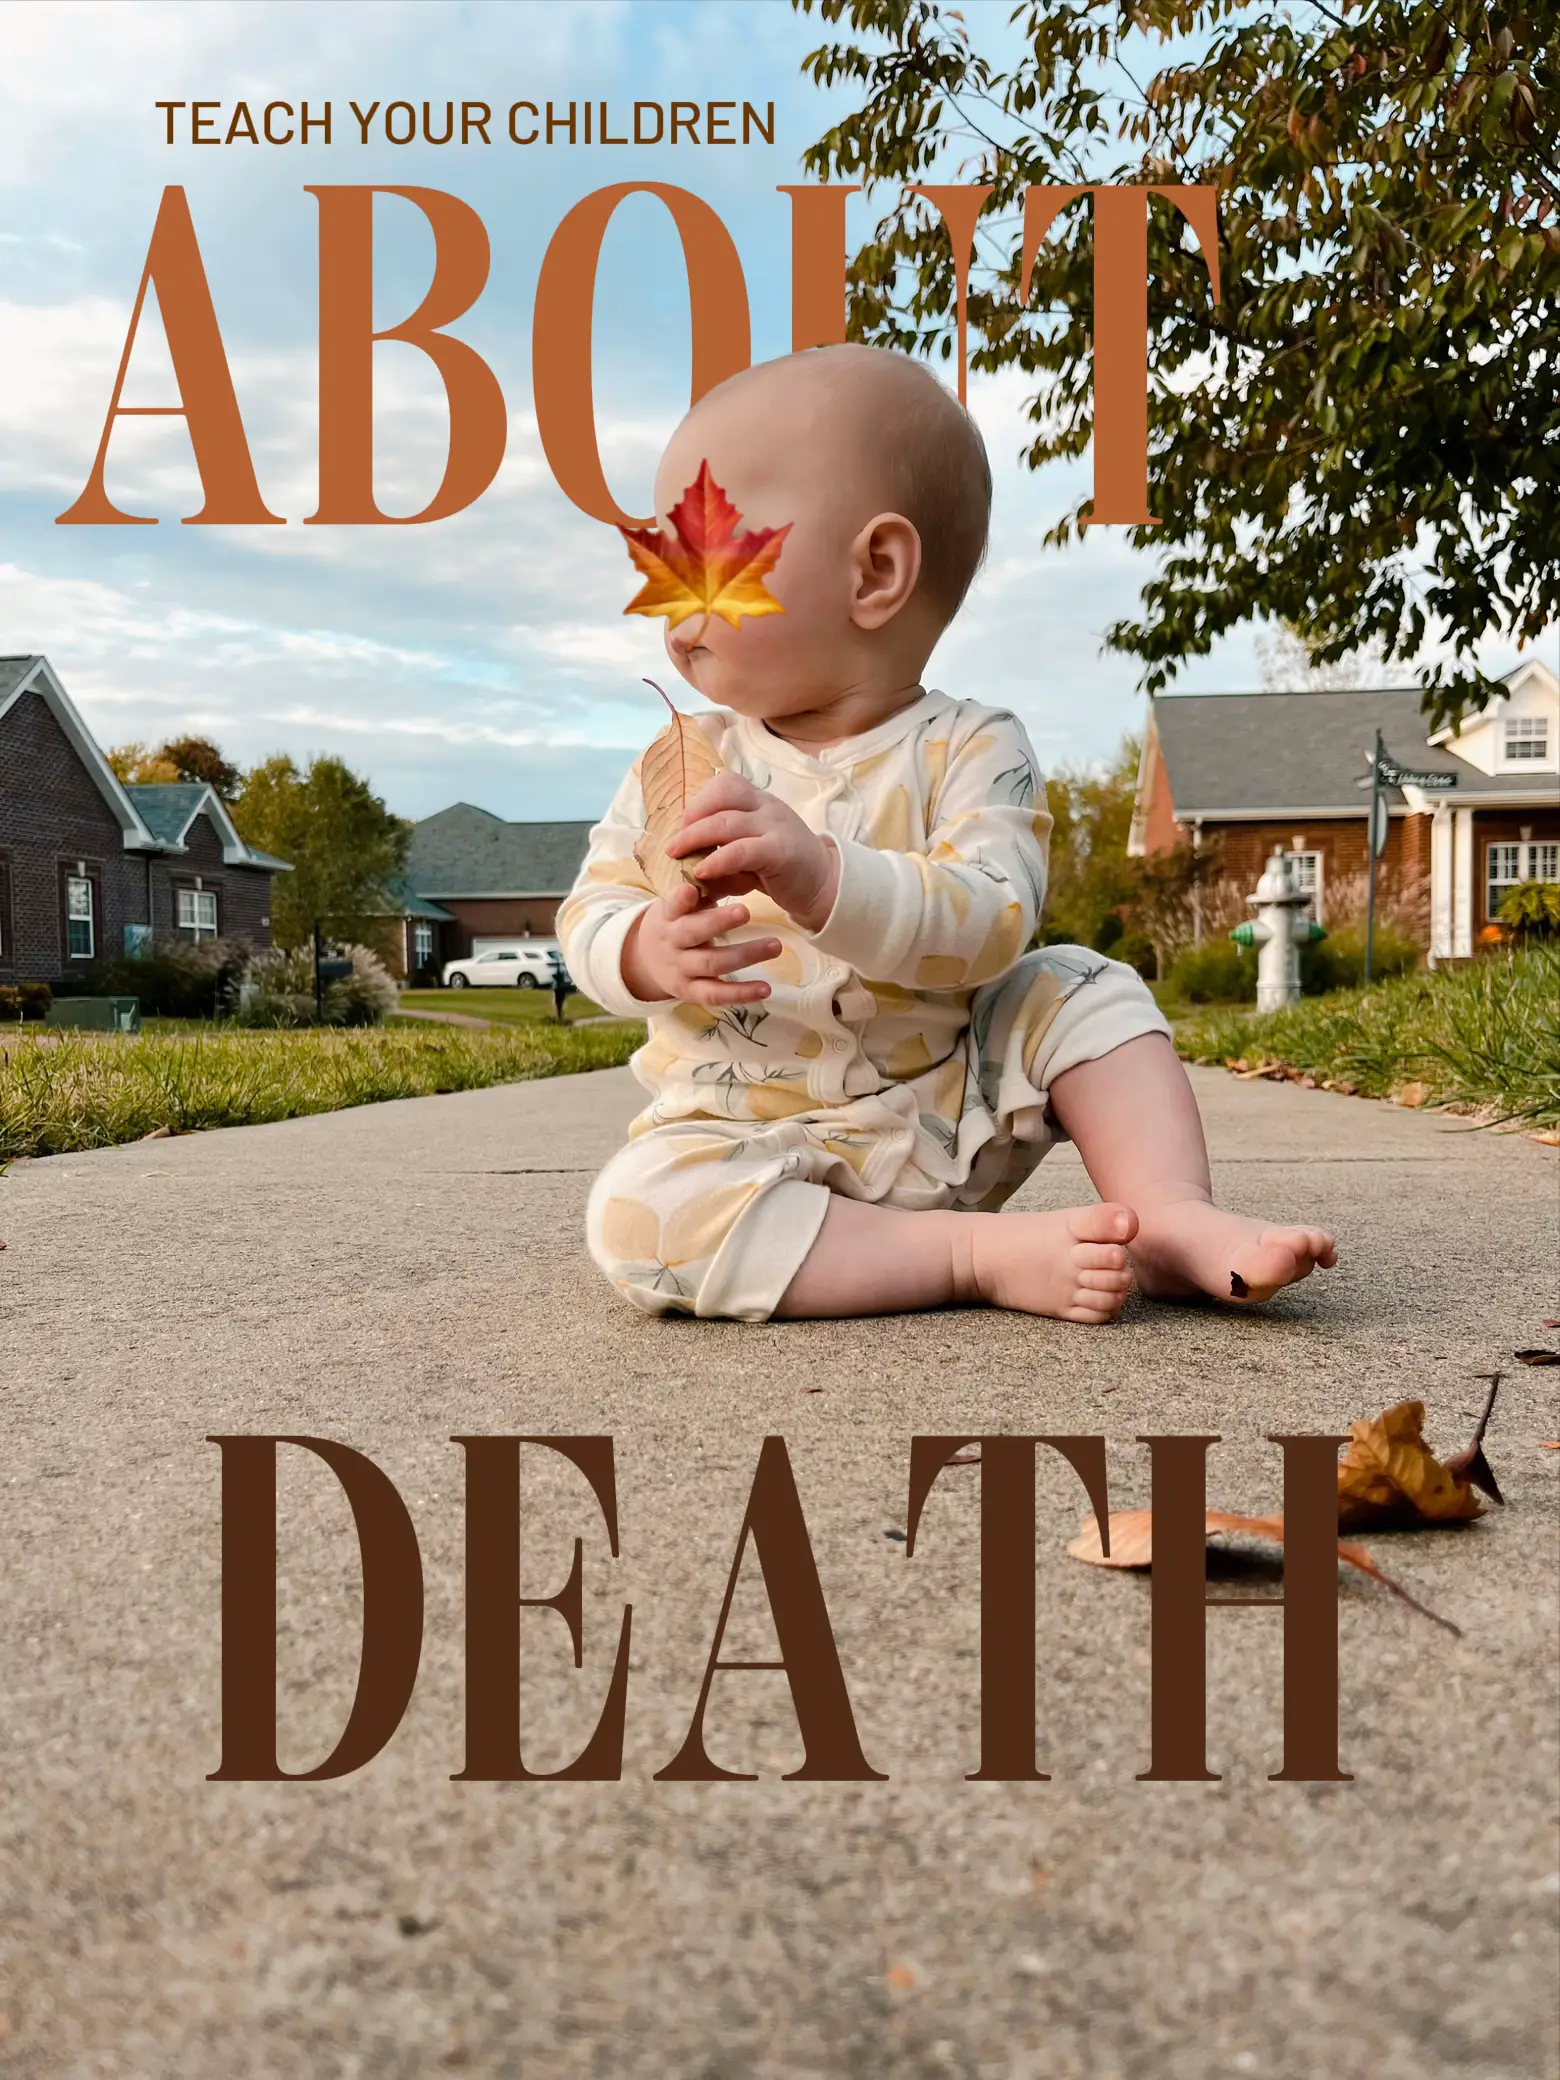  A baby is laying on the ground holding a leaf.